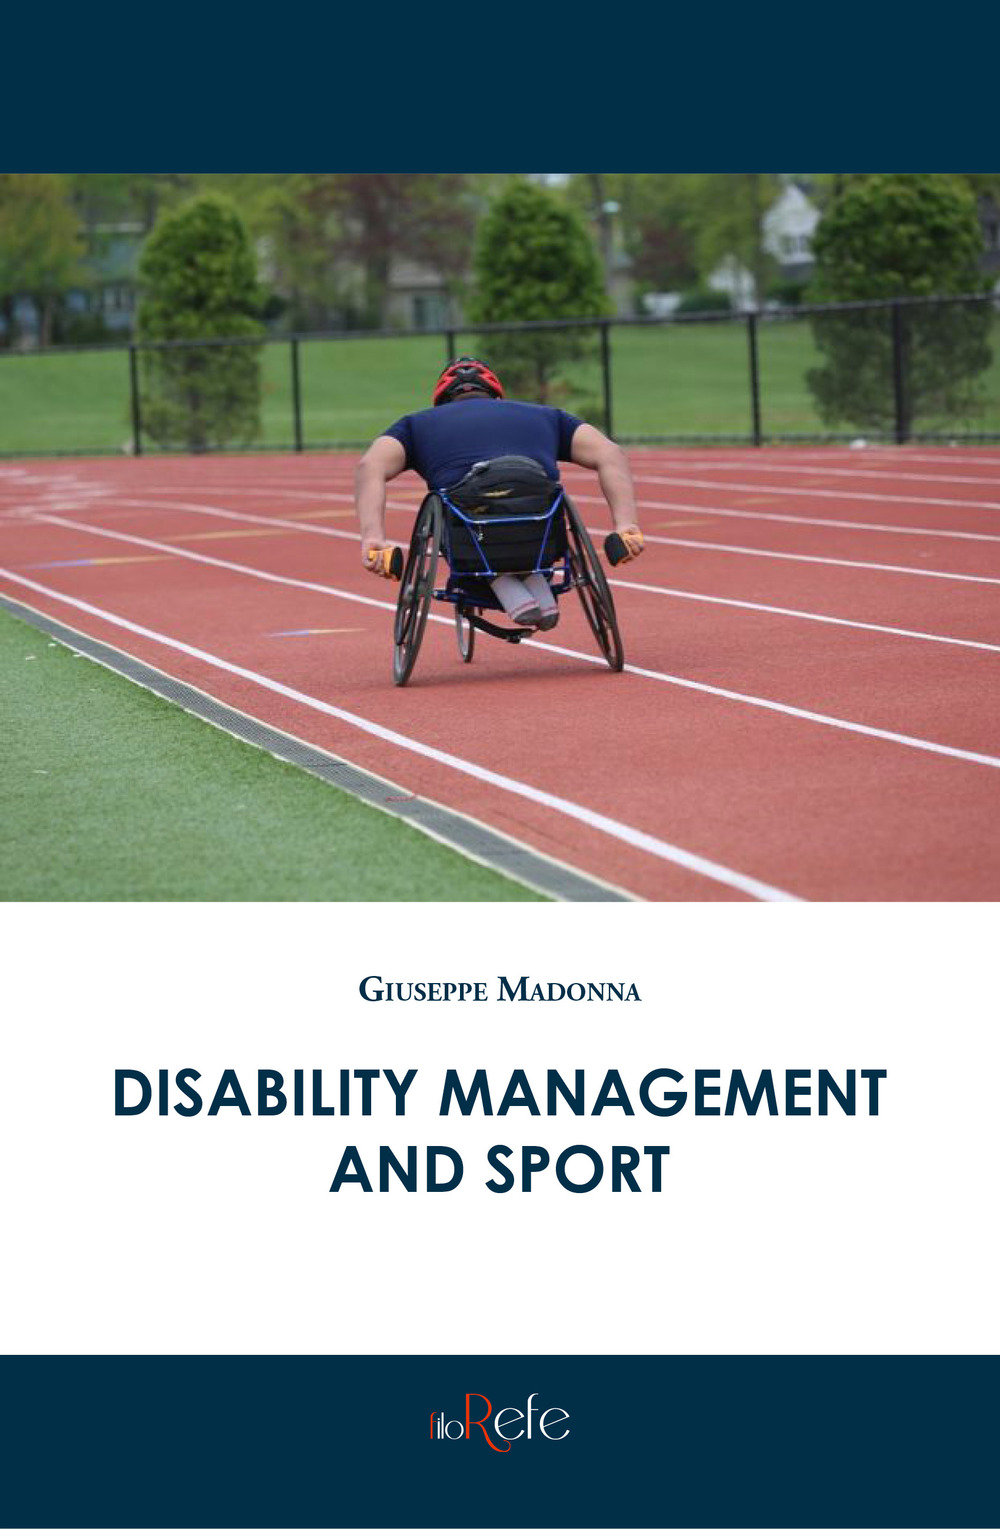 Disability management and sport